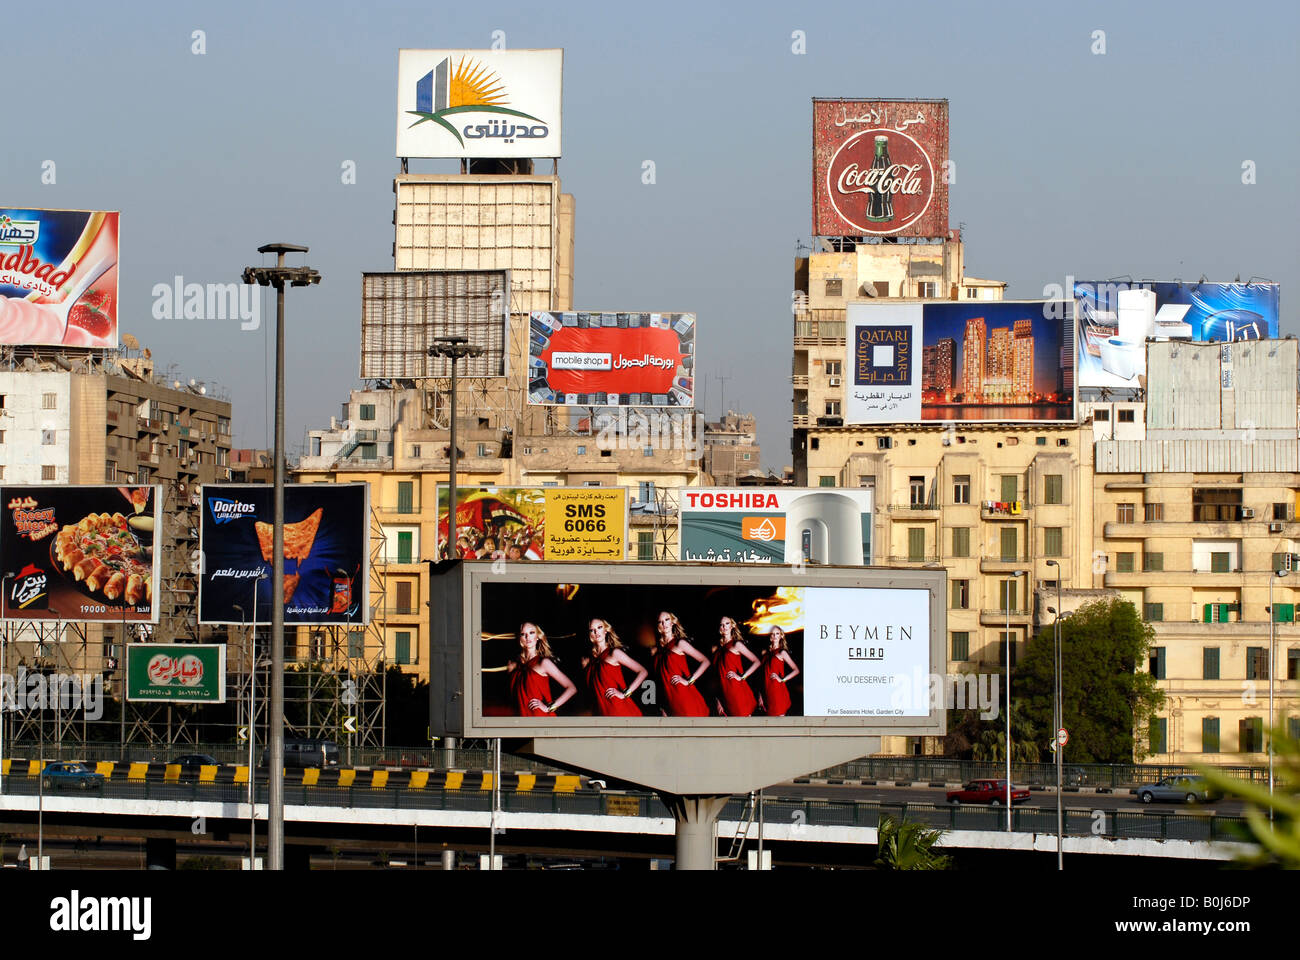 View of advertising hoardings on buildings in central Cairo Egypt Stock Photo